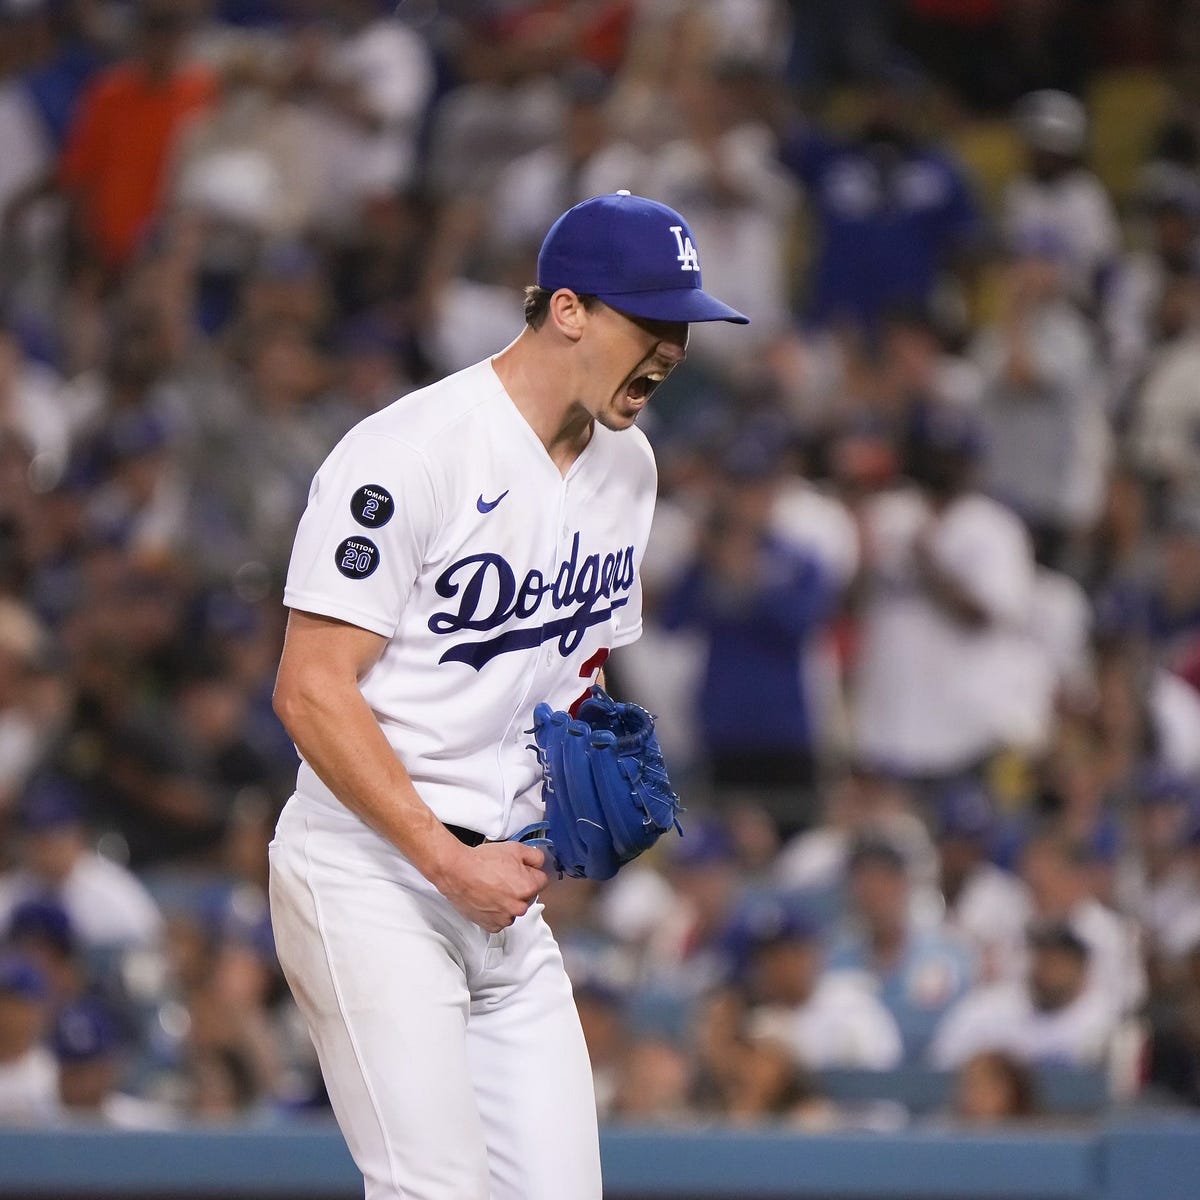 Was A Line Crossed In The 'Relationship' Between Dodgers Pitcher